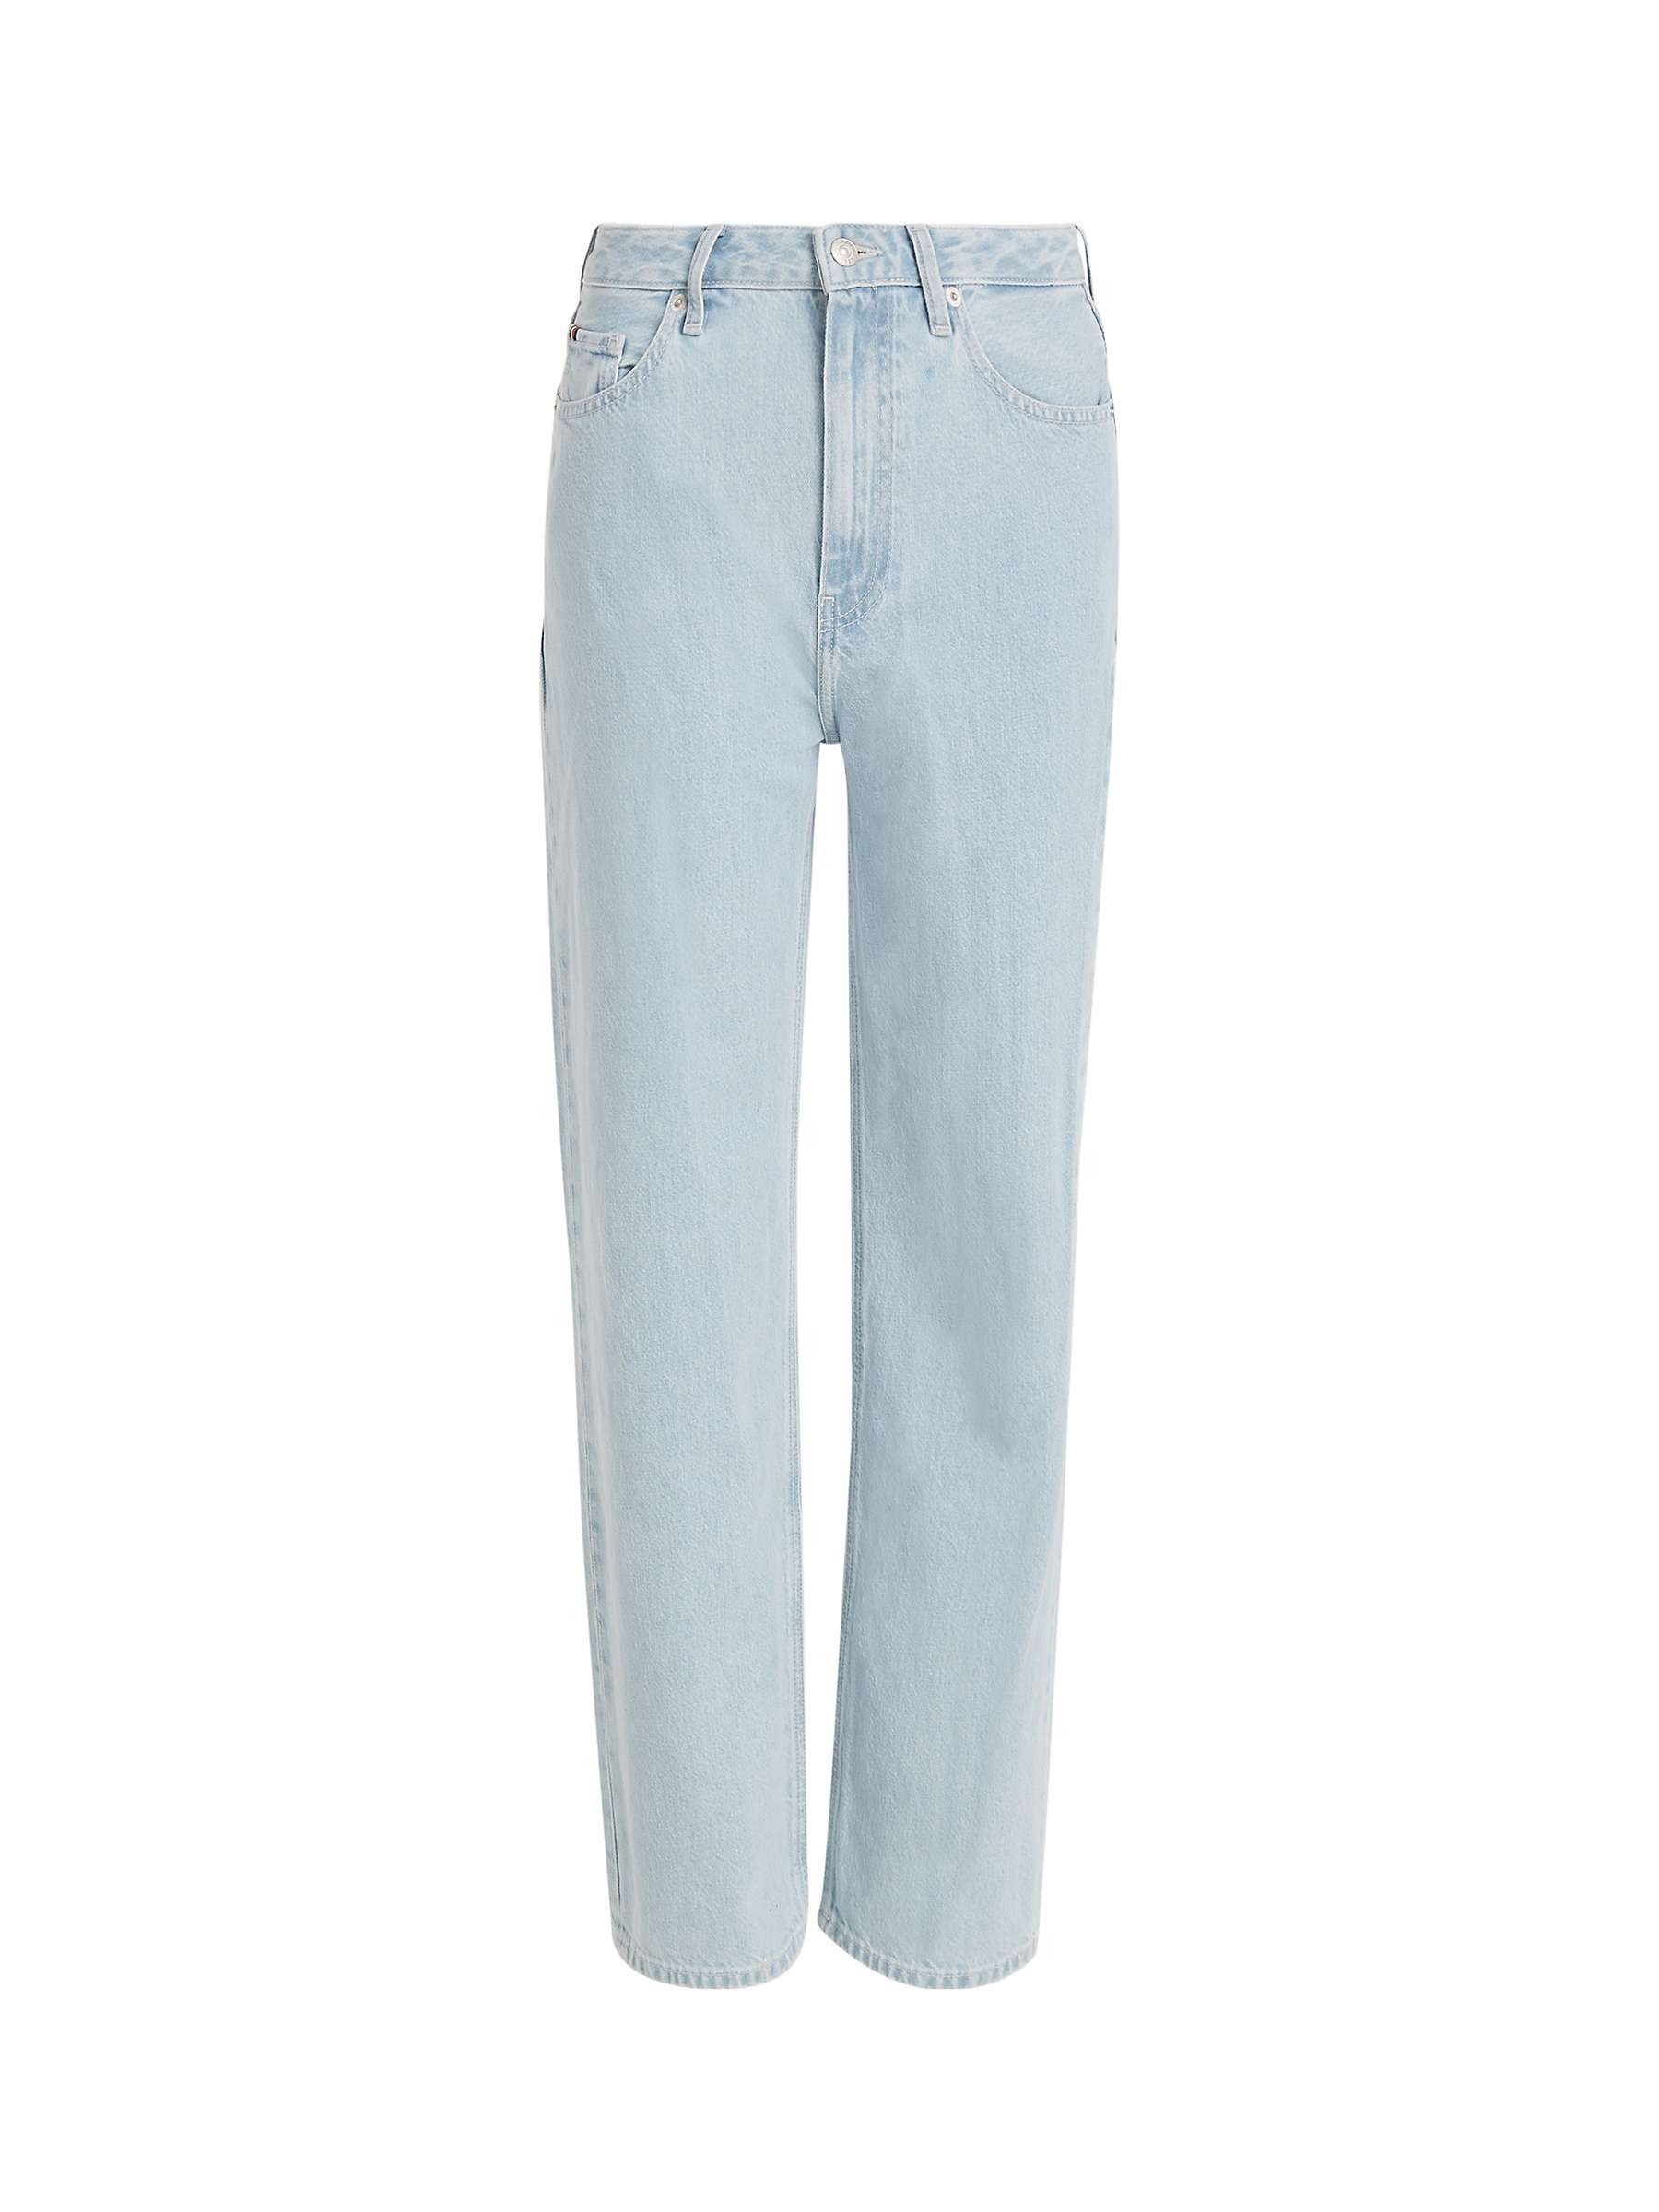 Buy Tommy Hilfiger Relaxed Fit Straight Cut Jeans, Mia Online at johnlewis.com